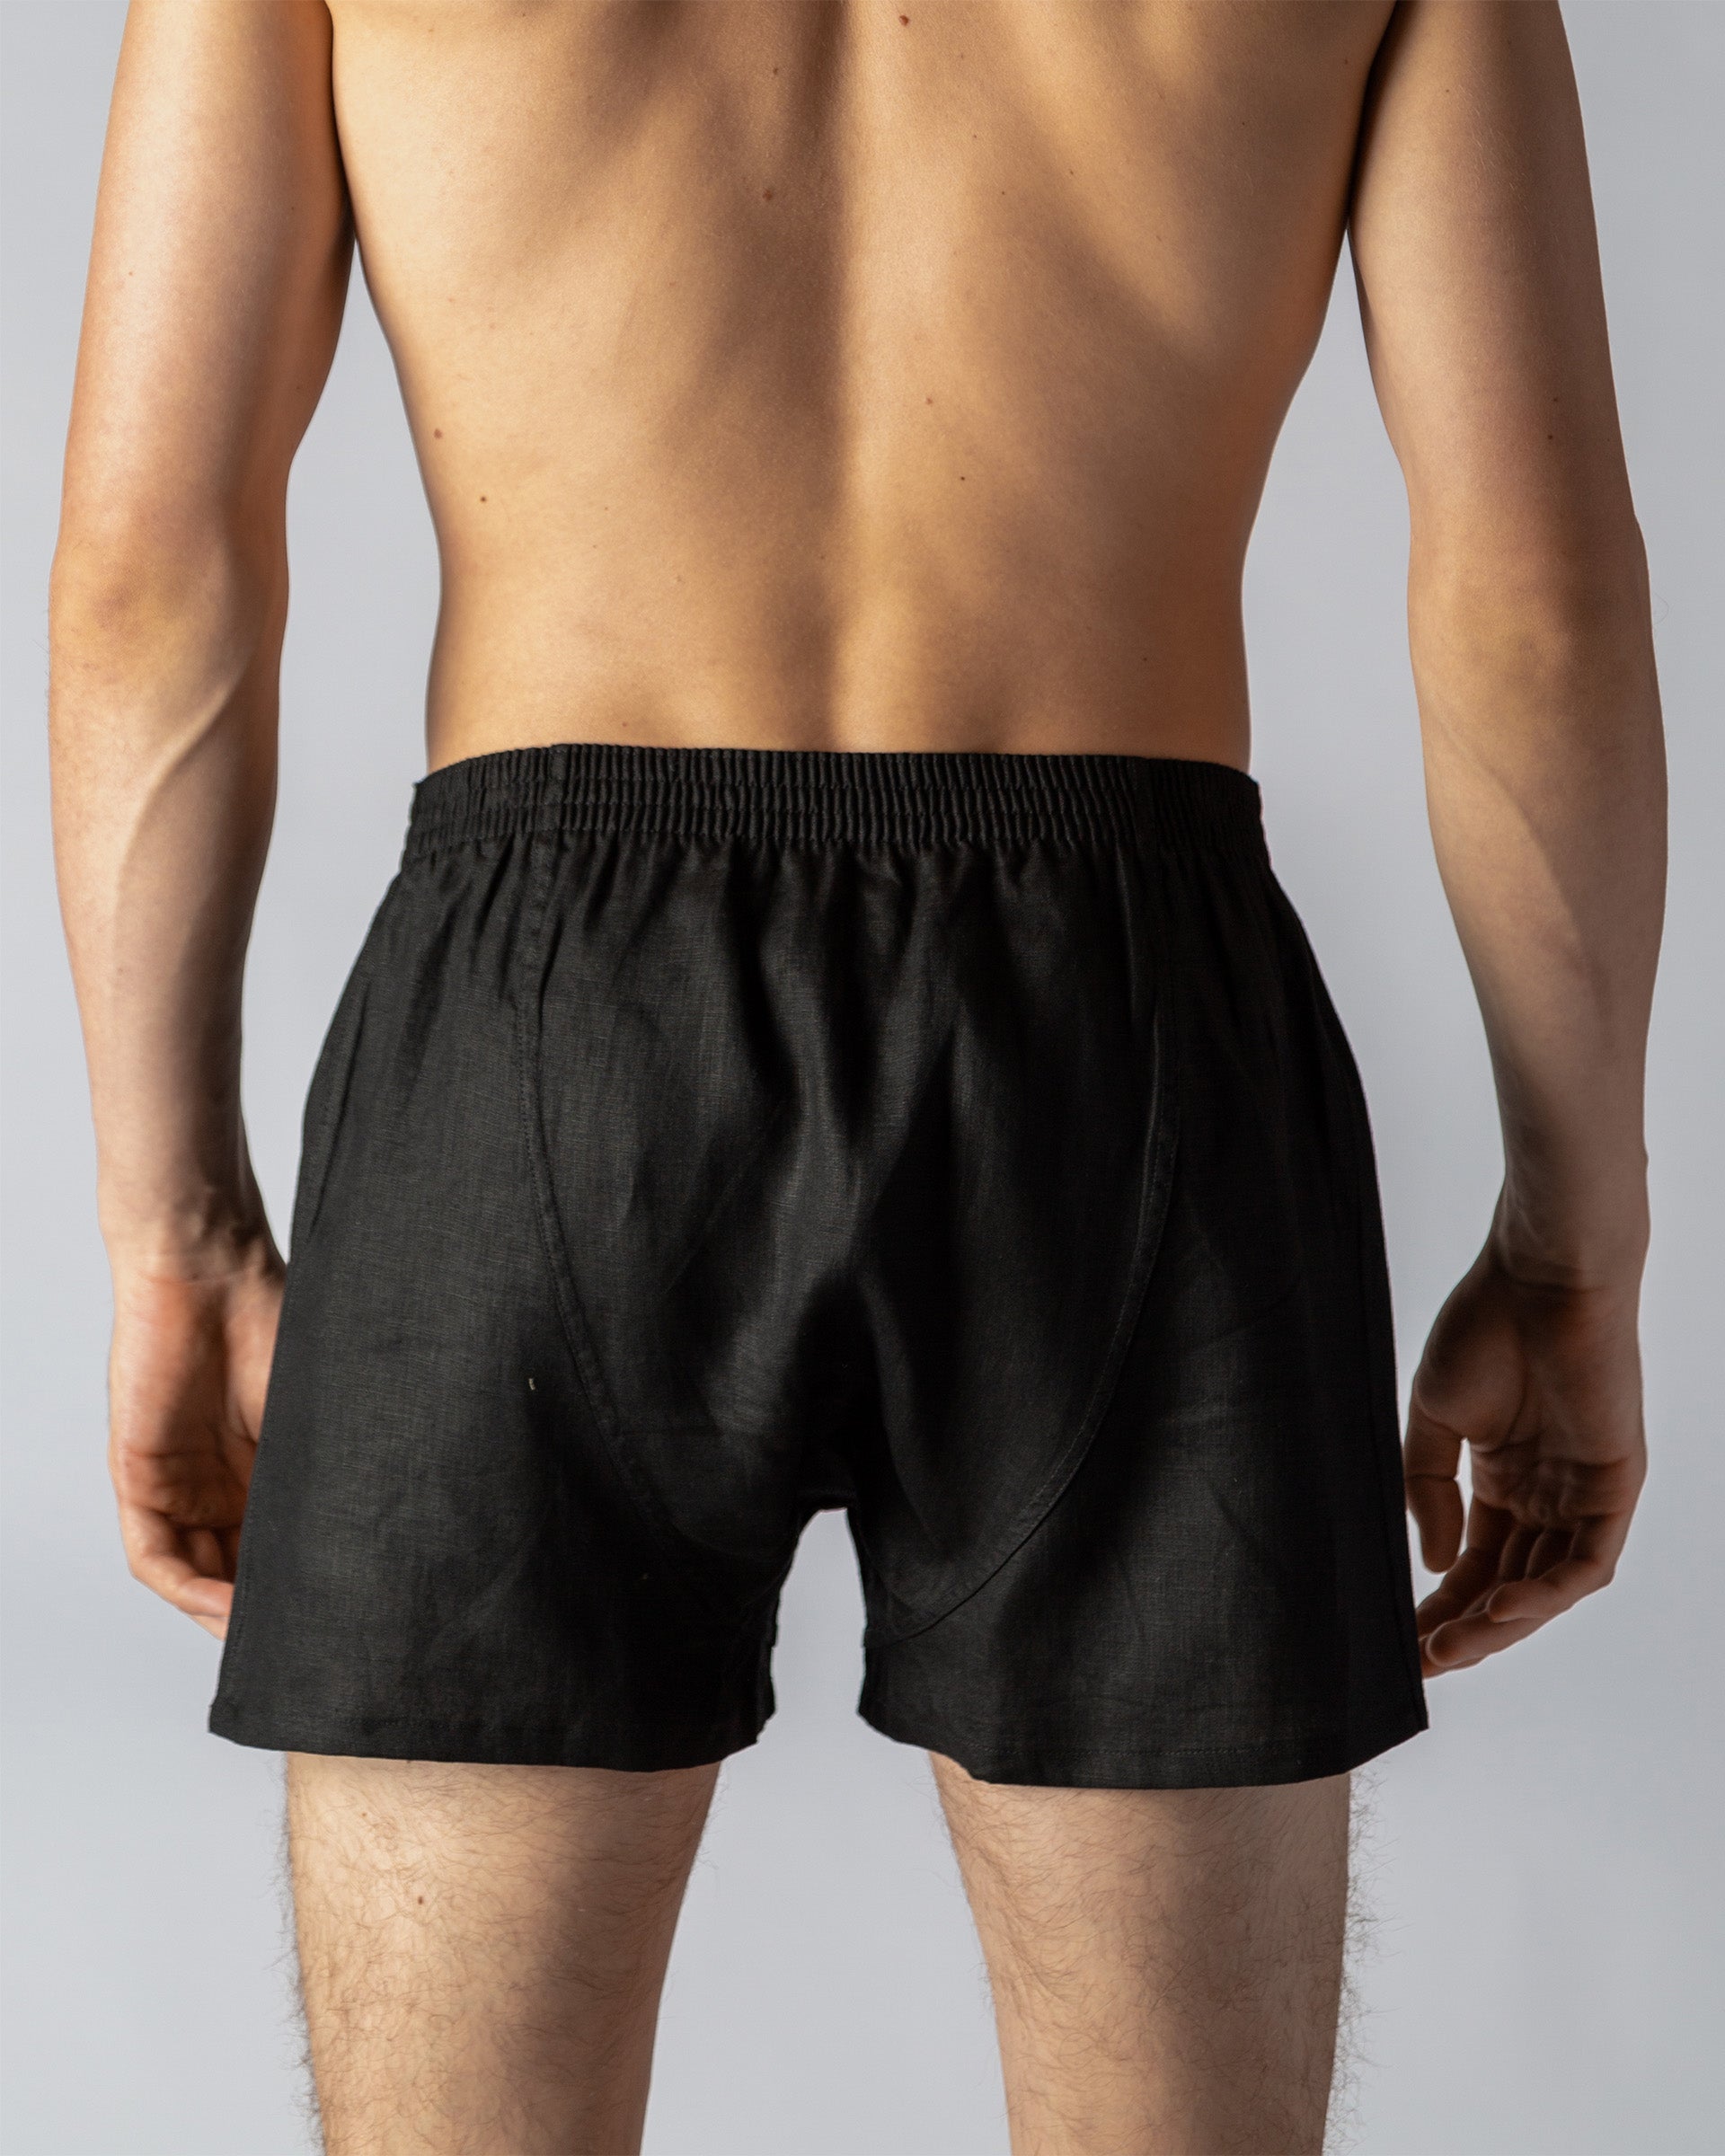 Boxer shorts in French linen made in Portugal